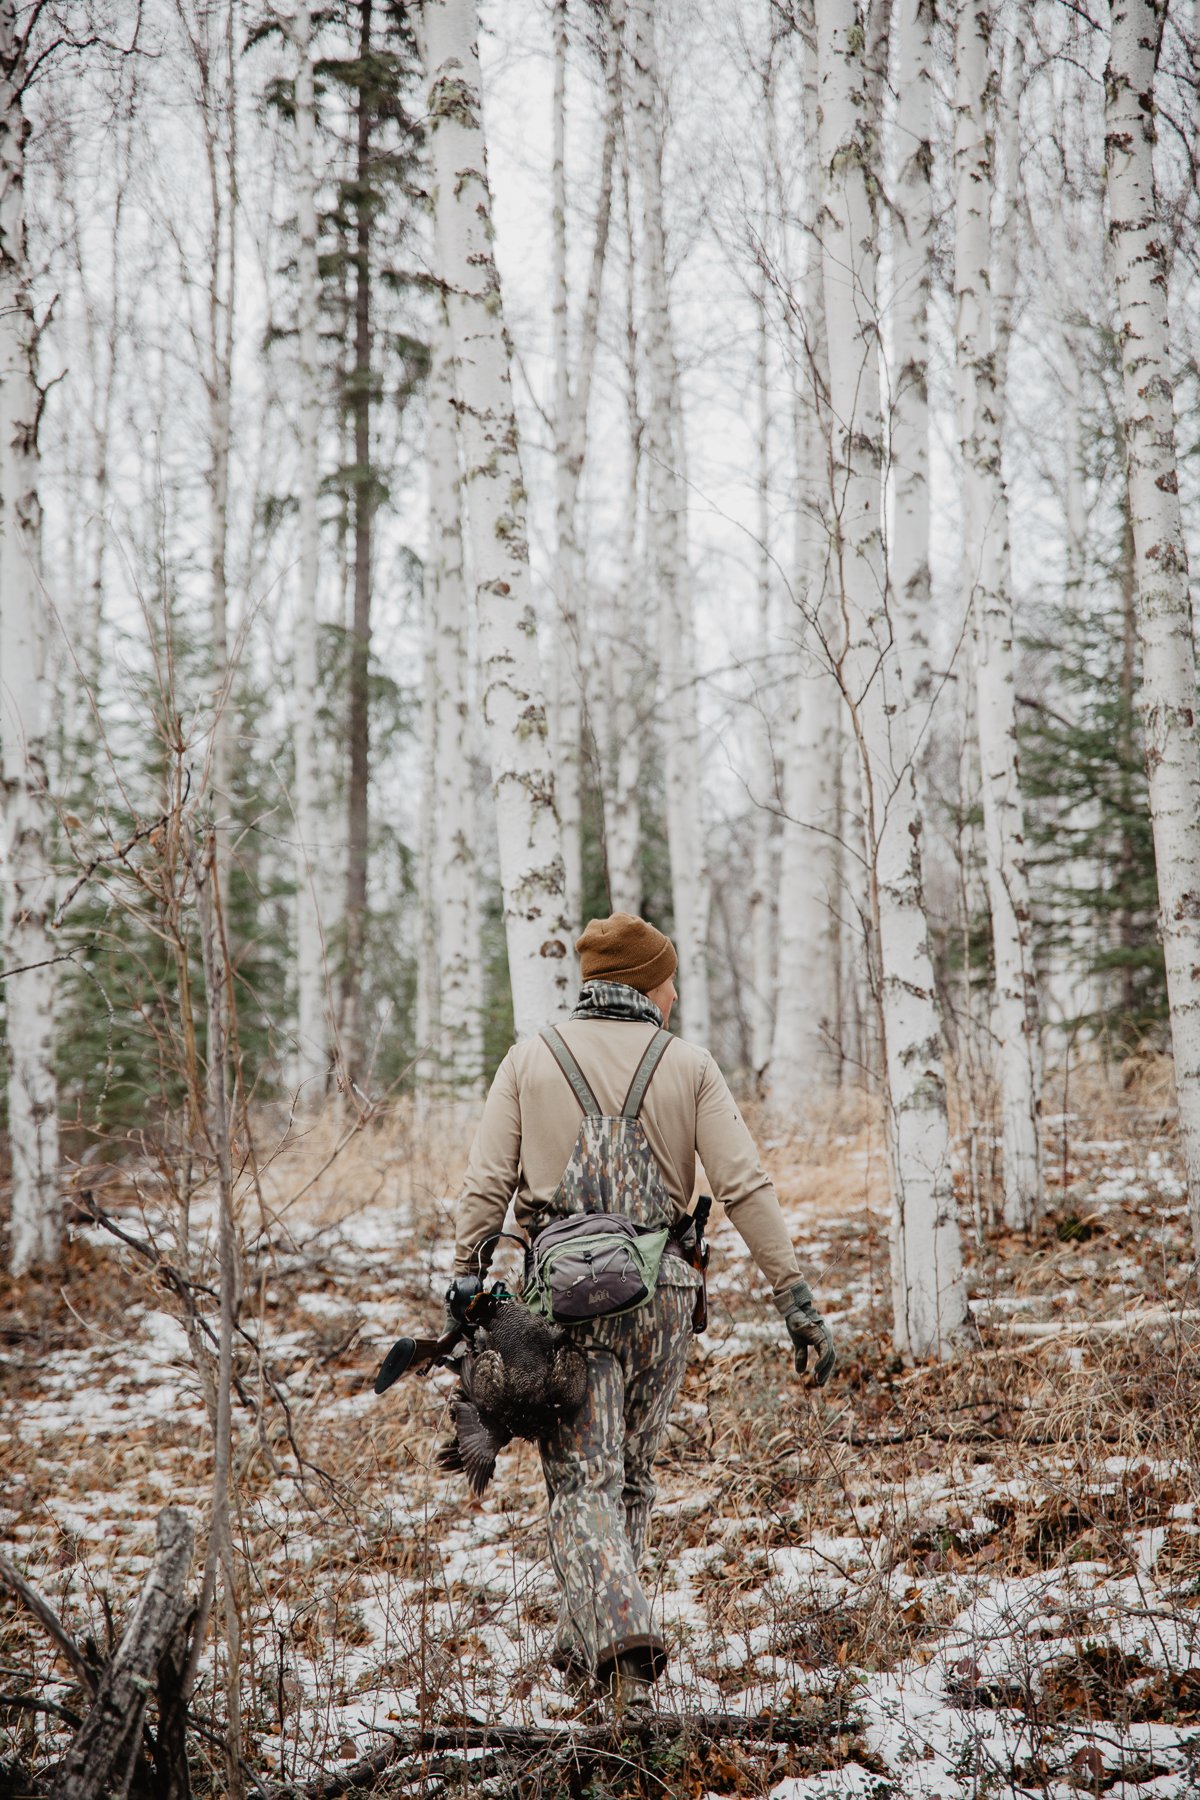 Hunter walks away from viewer in winter forest with dead bird in hand. 